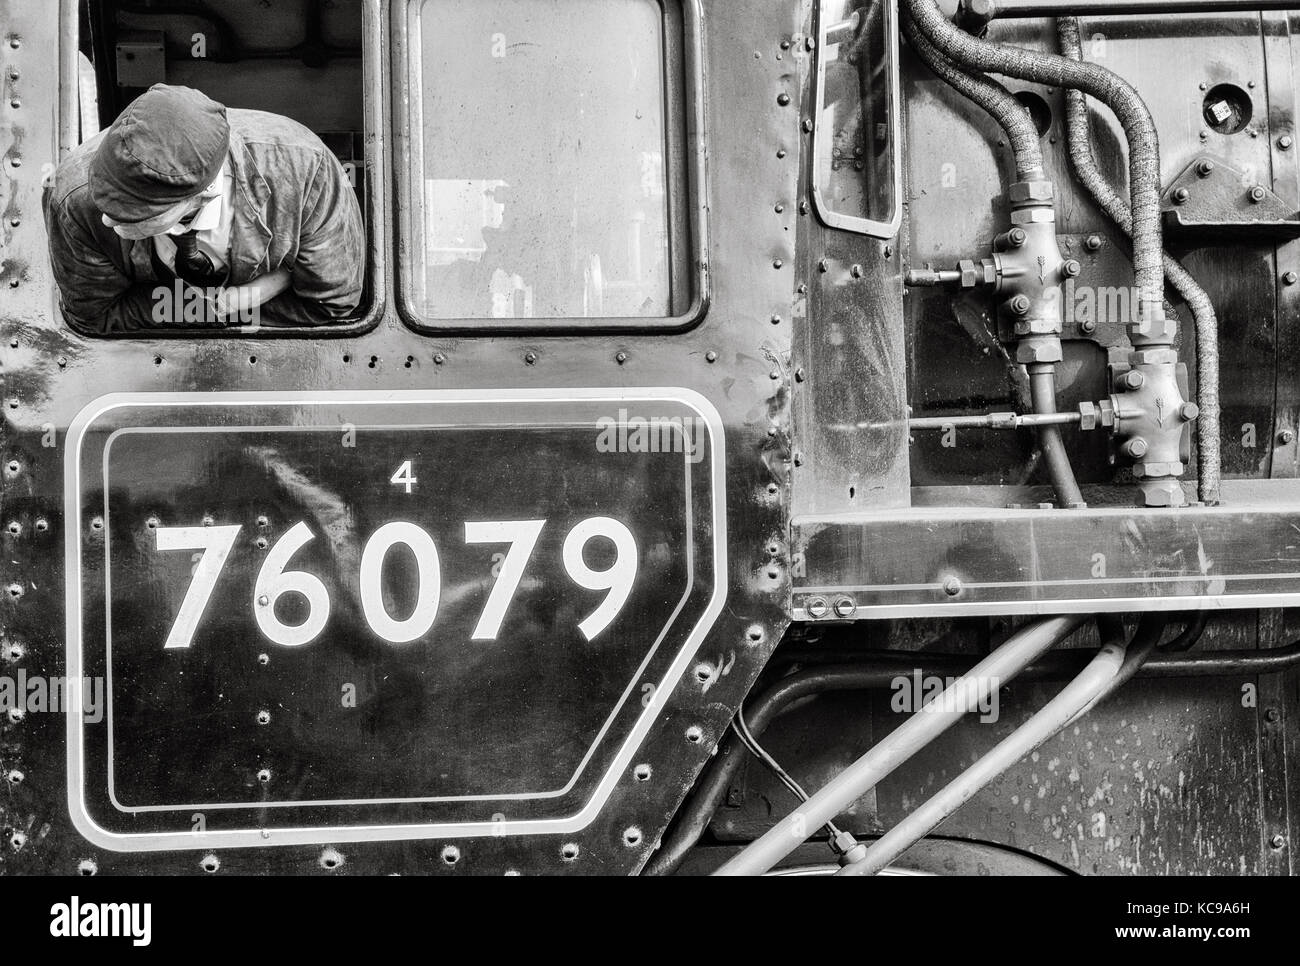 Steam train ( BR Standard 4MT No. 76079 ) at Grosmont station on The North Yorkshire Moors Railway. Grosmont, North Yorkshire, England. UK Stock Photo